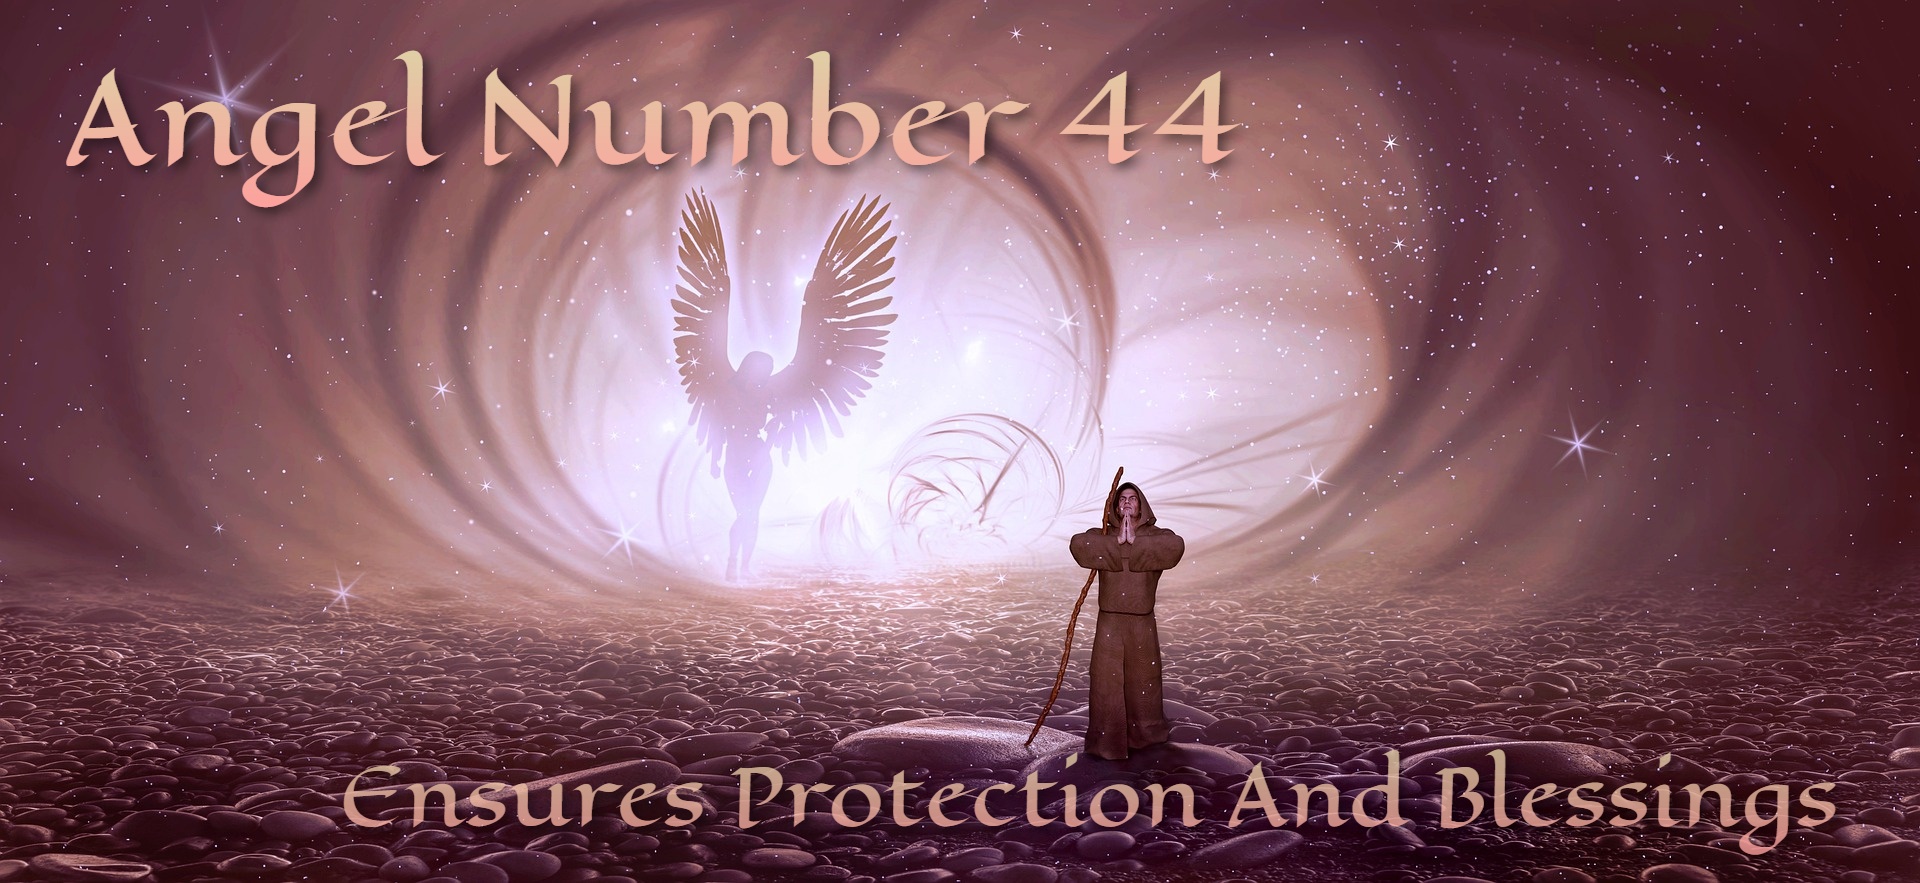 Angel Number 44 - Ensures Protection And Blessings